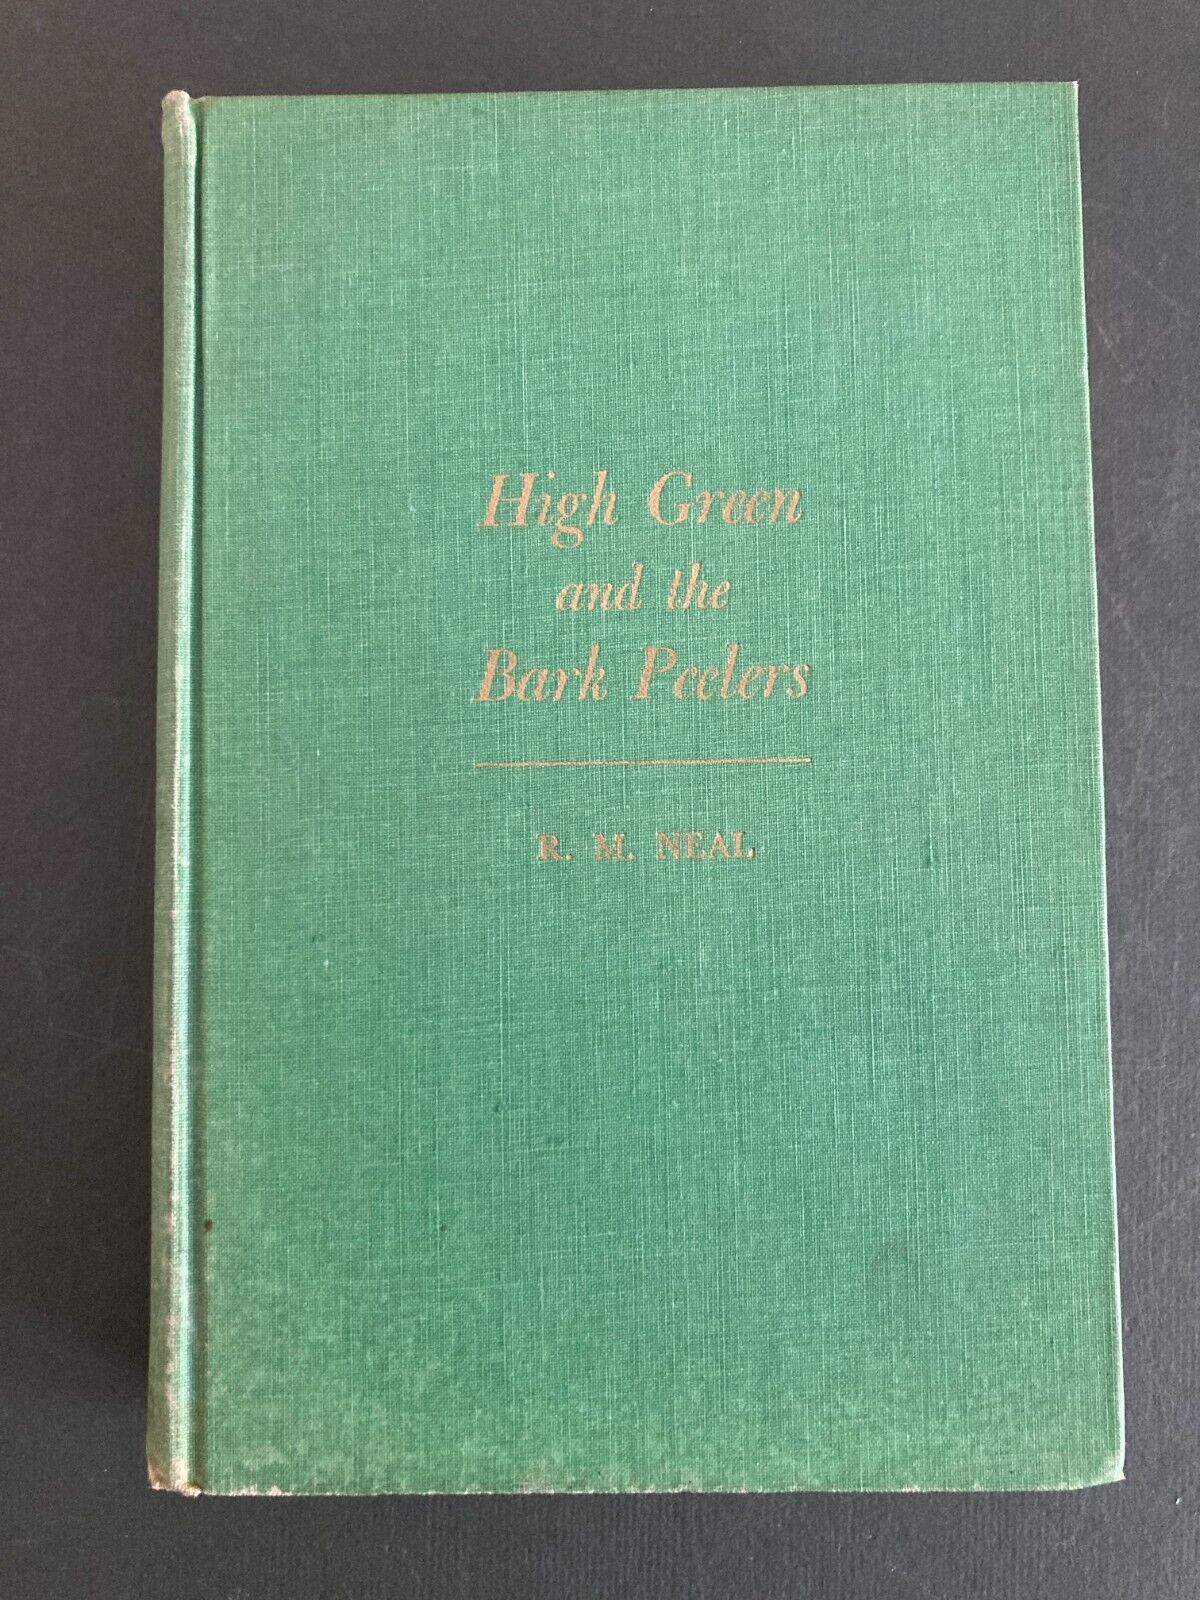 High Green and the Bark Peelers by R.M. Neal  Hardcover 1950 First Edition